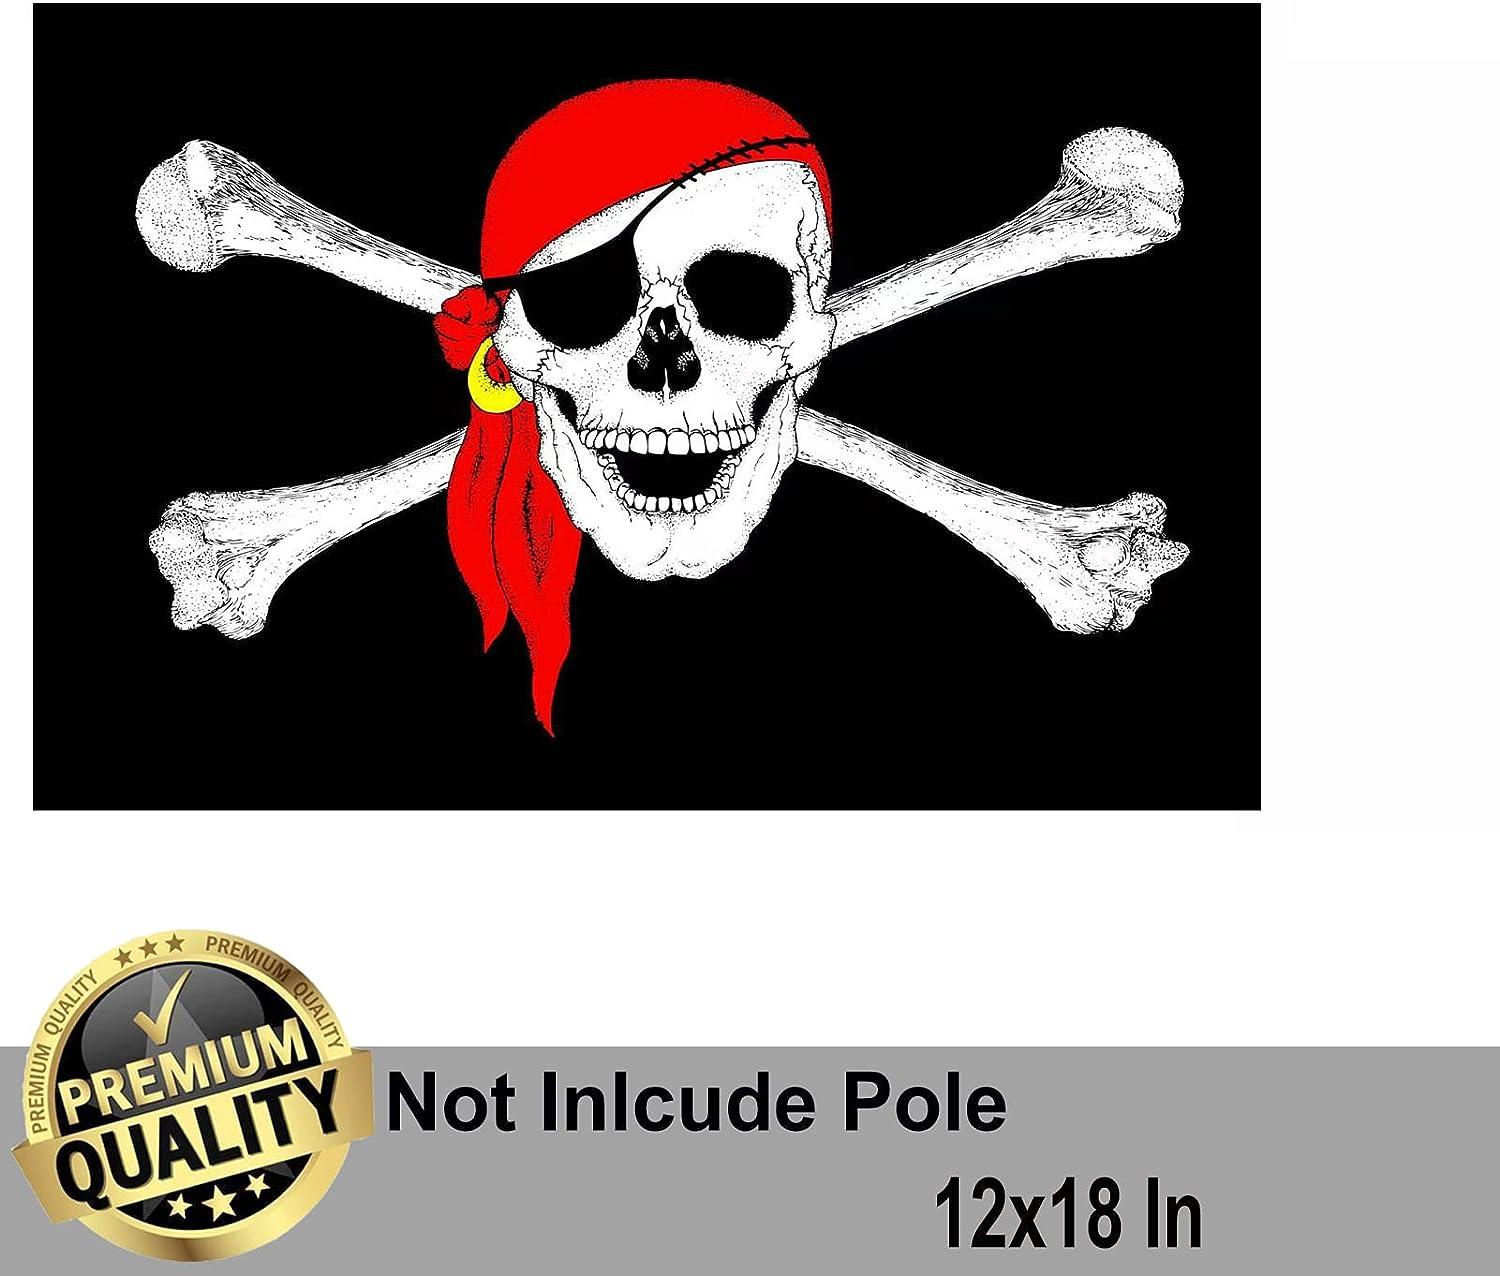 Jolly Roger Pirate Boat Flag 12x18 Made In USA- Small Red Bandana Pirate  Yacht Skull Flags with Cross Bones Heavy Duty 3 Ply Banner for Beach Decor  Boat Outside Red Bandana Pirate